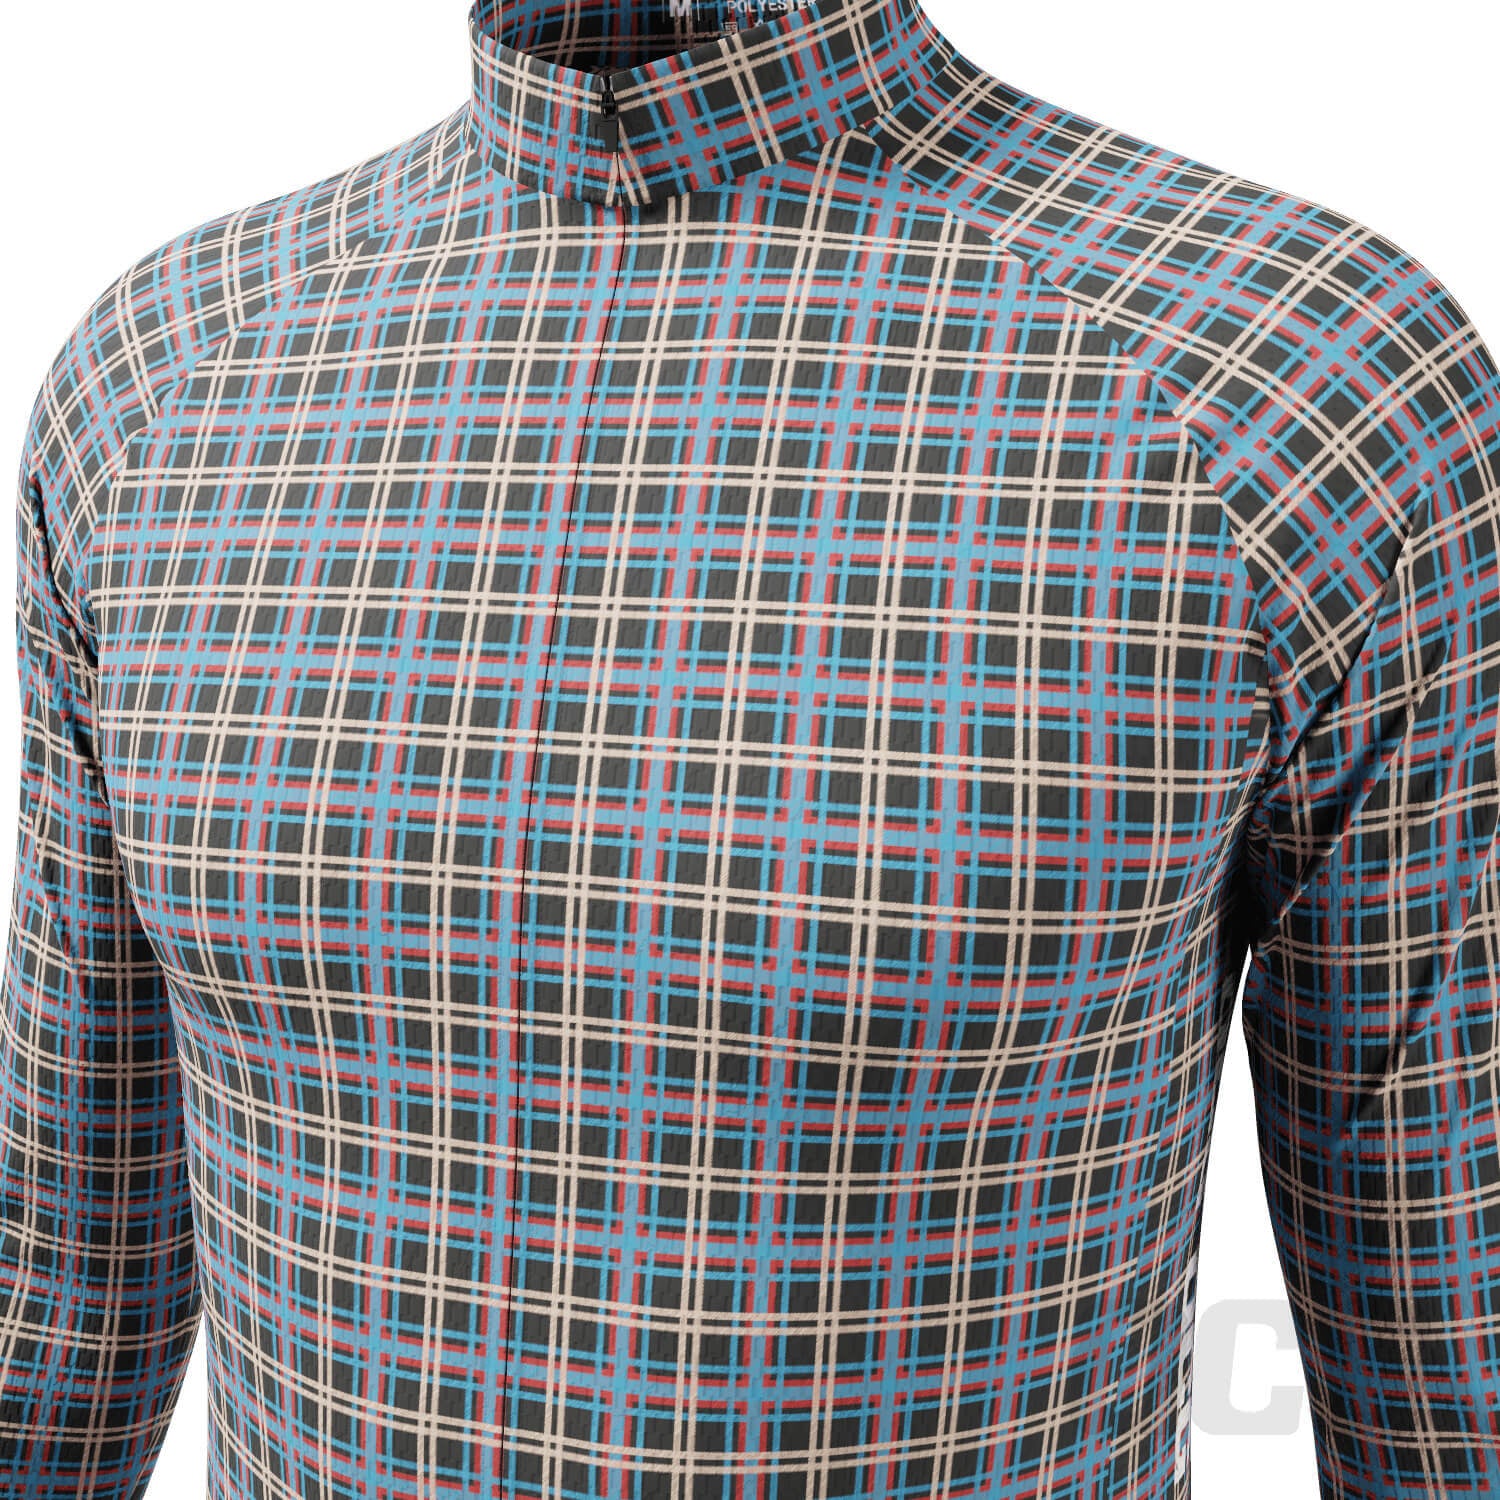 Men's Blue Plaid Checkered Long Sleeve Cycling Jersey